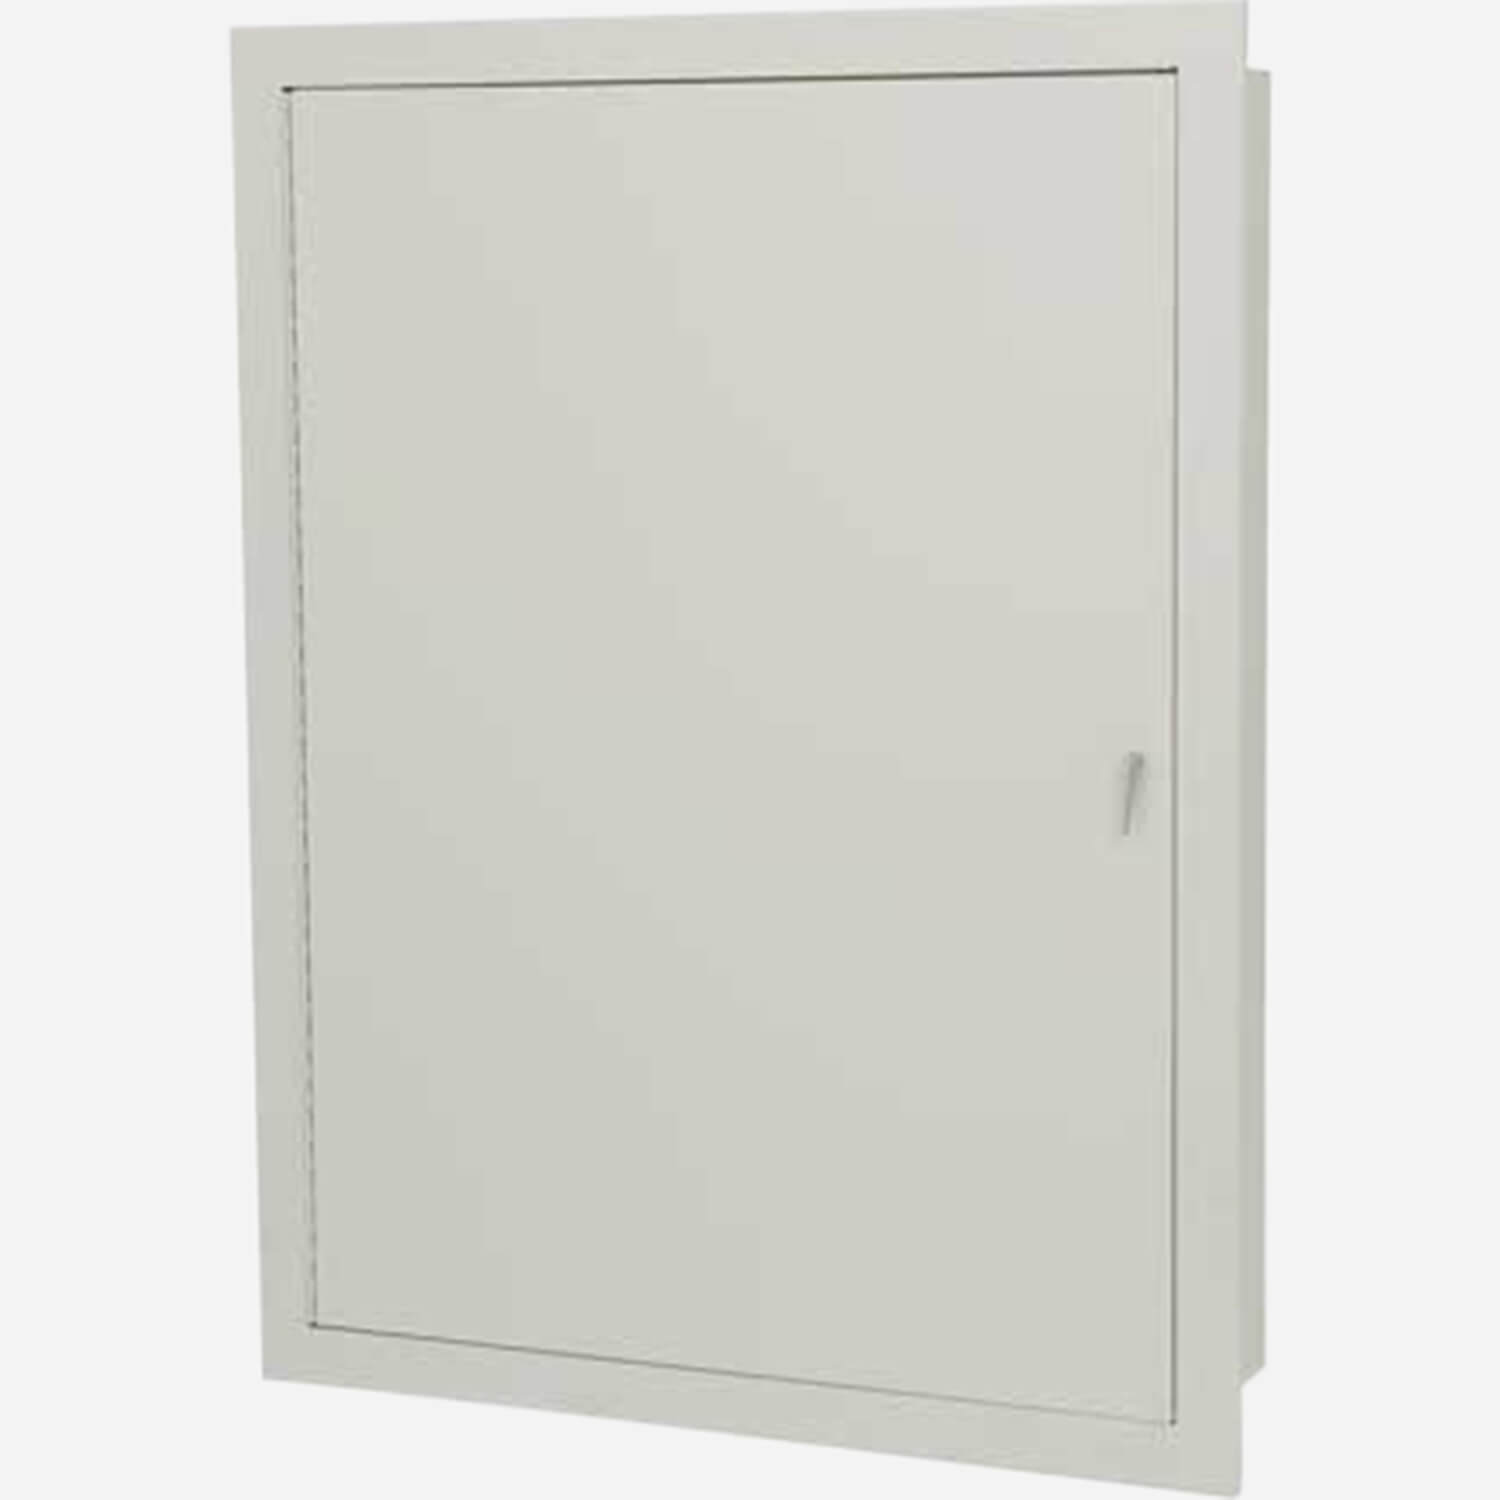 Potter Roemer Alta Series Semi Recessed Fire Extinguisher Cabinets